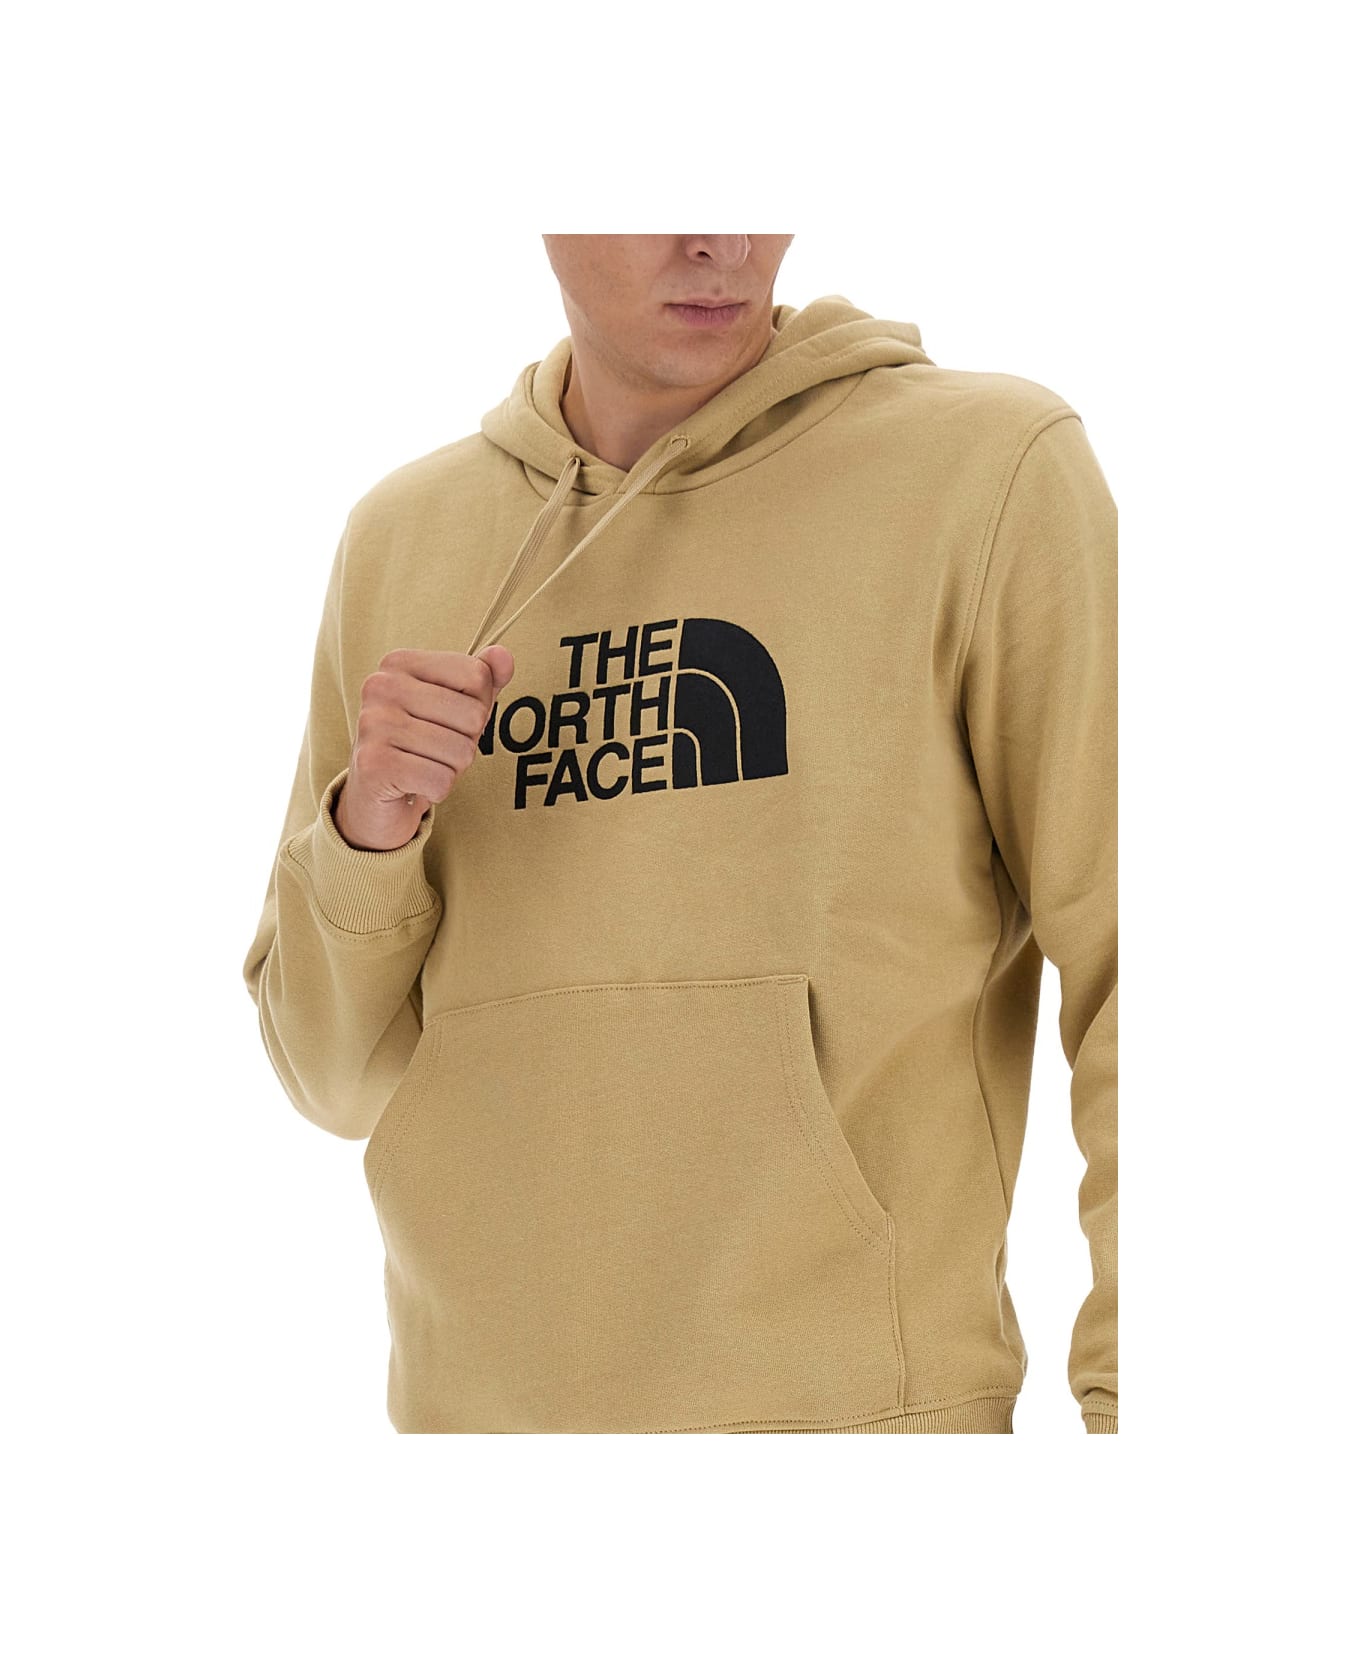 The North Face Sweatshirt With Logo - BEIGE